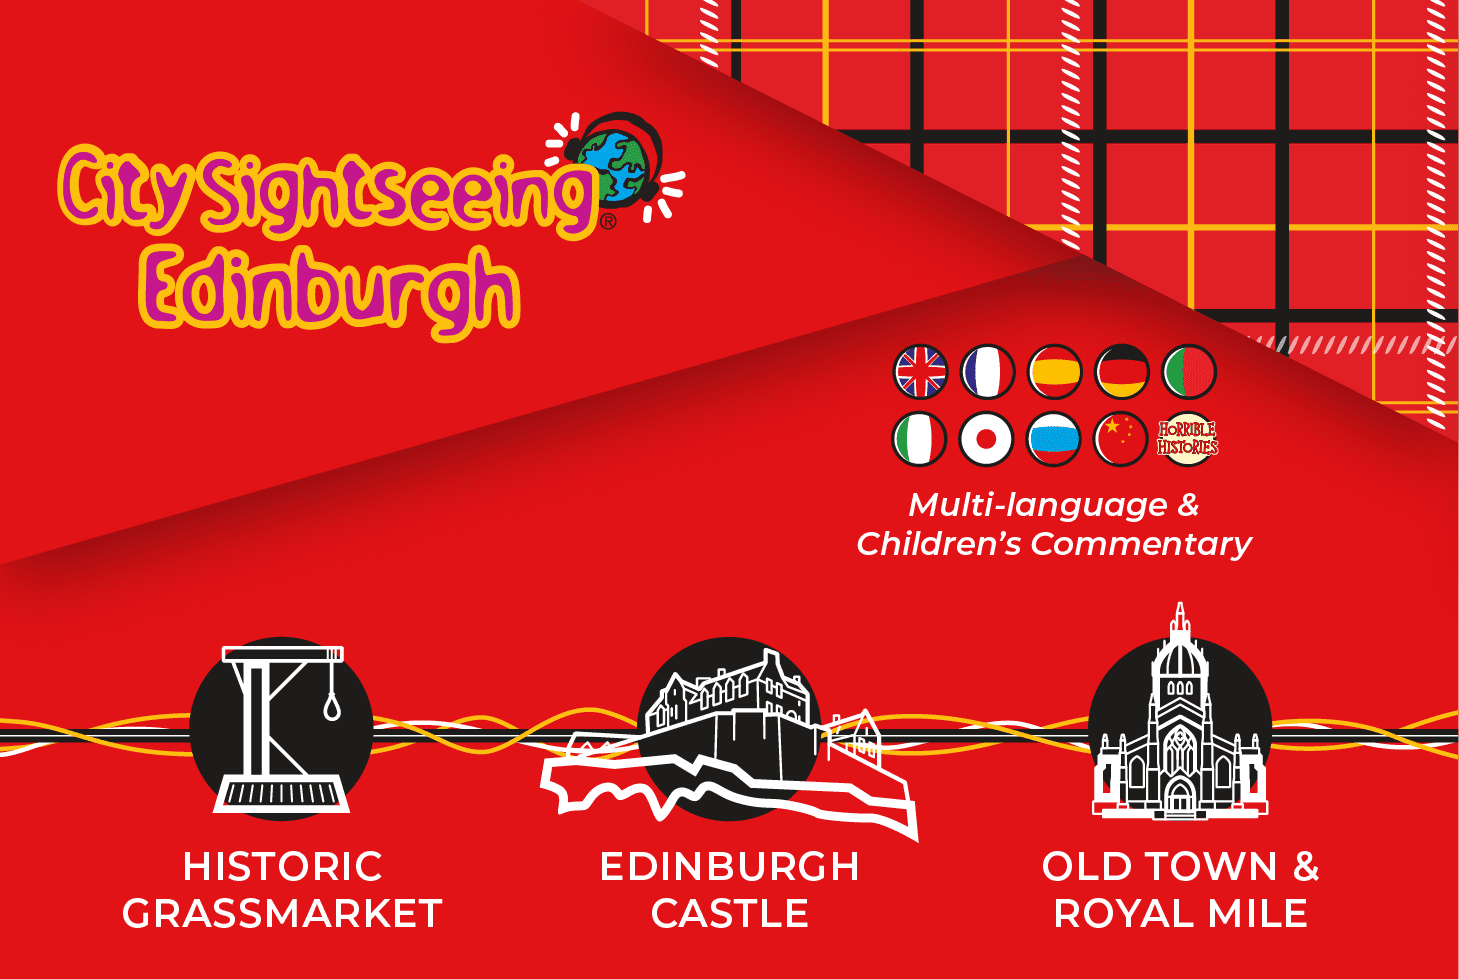 CitySightseeing Edinburgh Tour. Multi-language & Children's Commentary. The tour includes the Historic Grassmarket, Edinburgh Castle, the Old Town and Royal Mile.